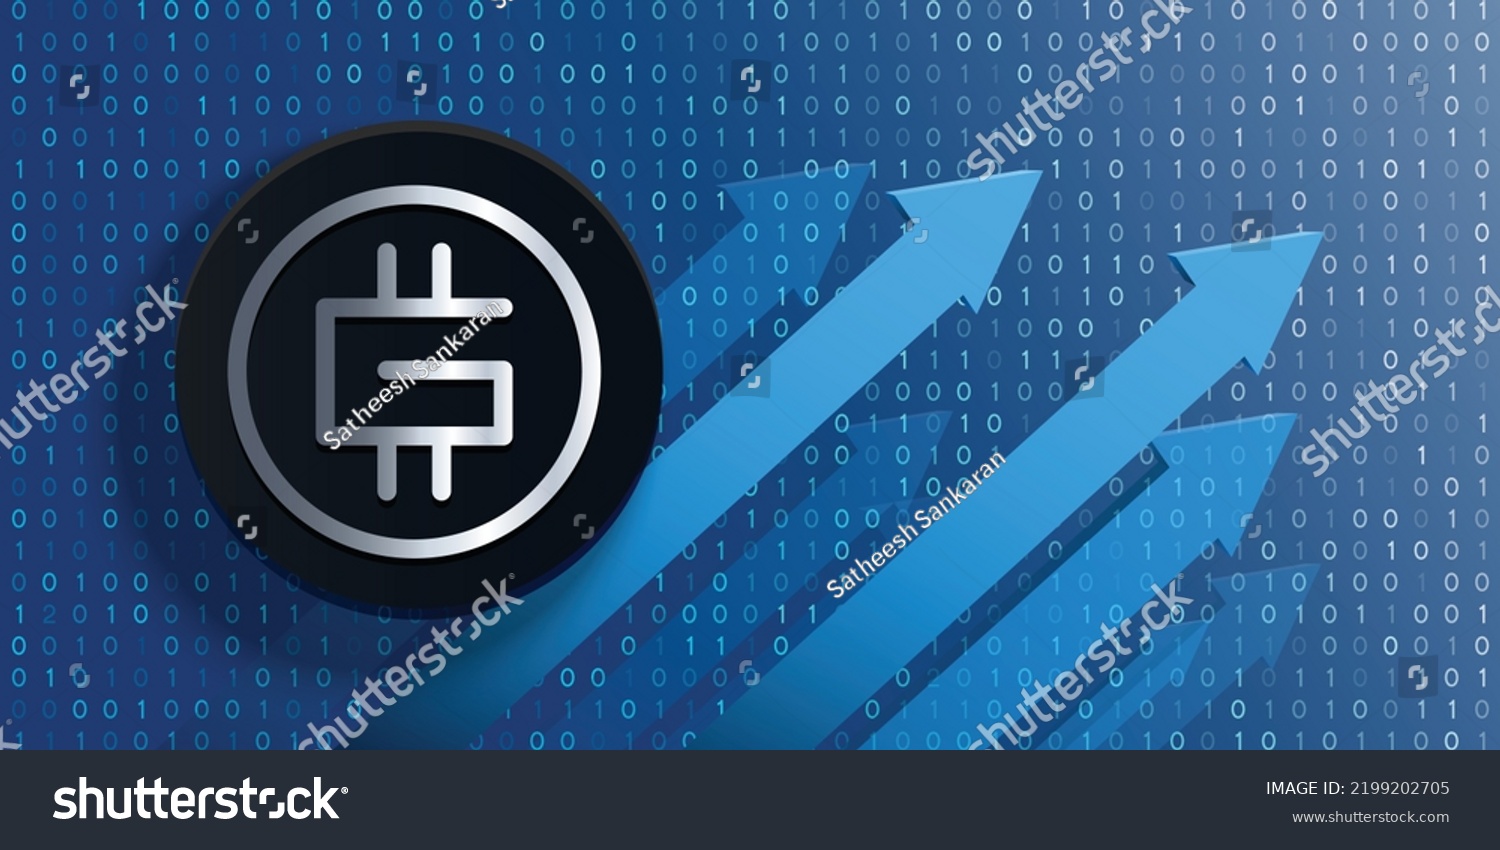 SVG of STEPN (GMT) crypto currency logo coin on futuristic financial technology background and banner vector illustration. Can be used as cover, header, backdrop, poster, wallpaper and print design svg